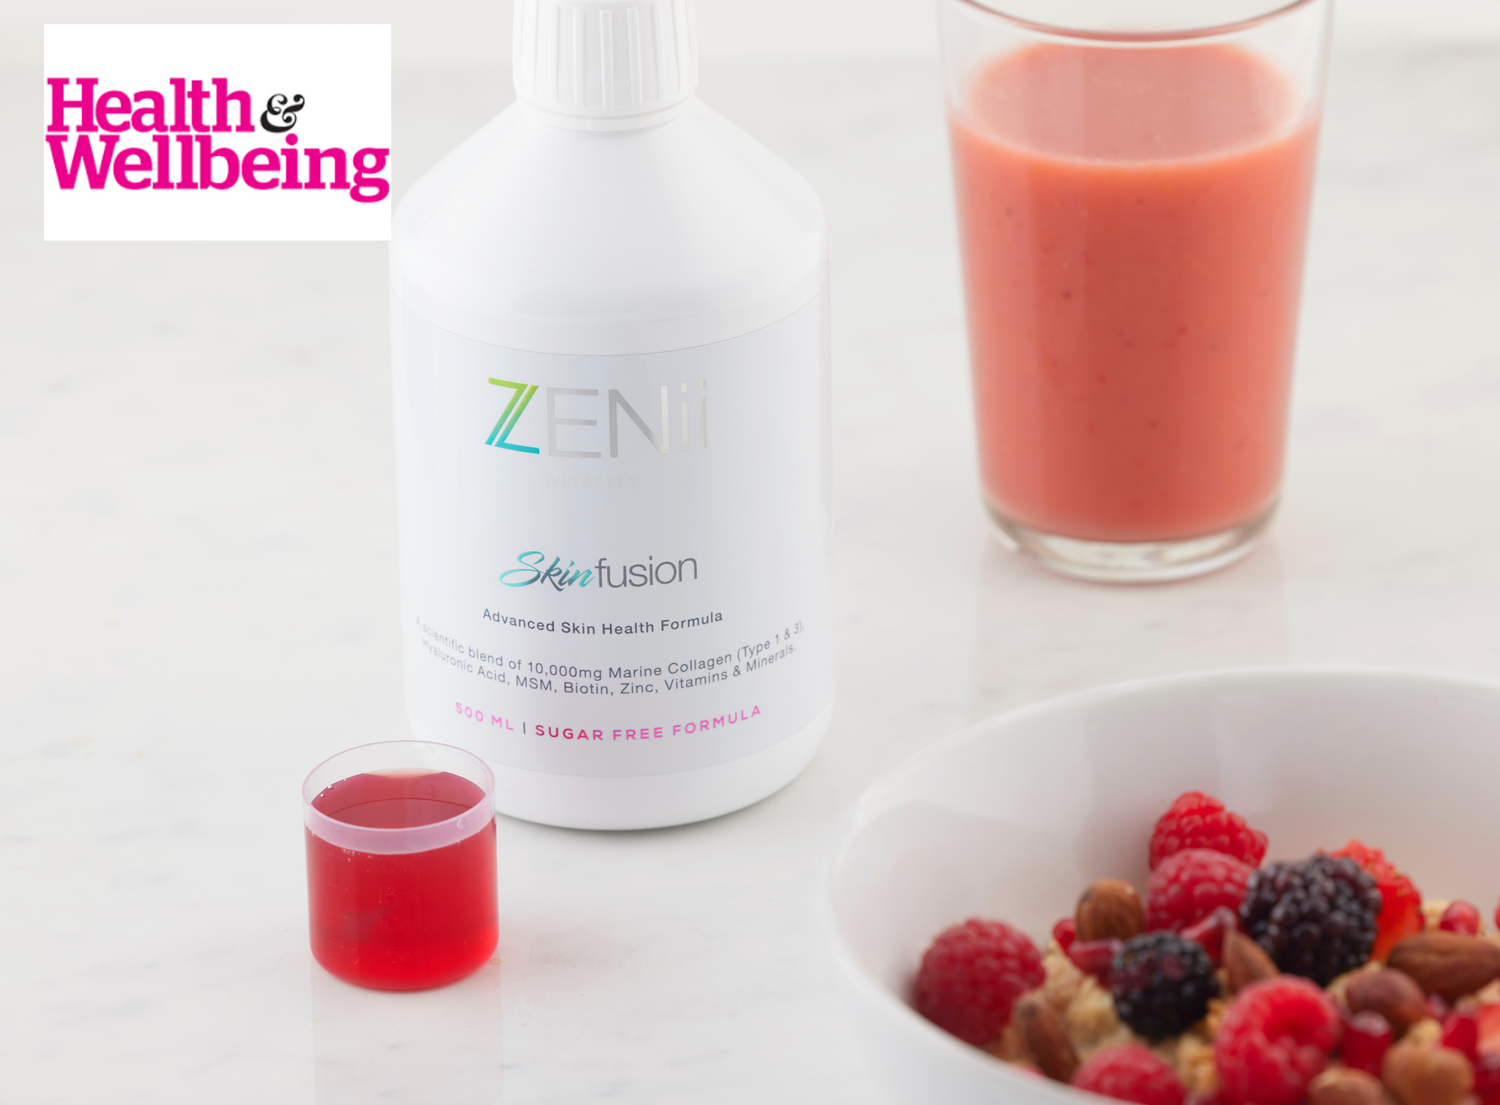 ZENii Fusion - Featured in Health and Wellbeing